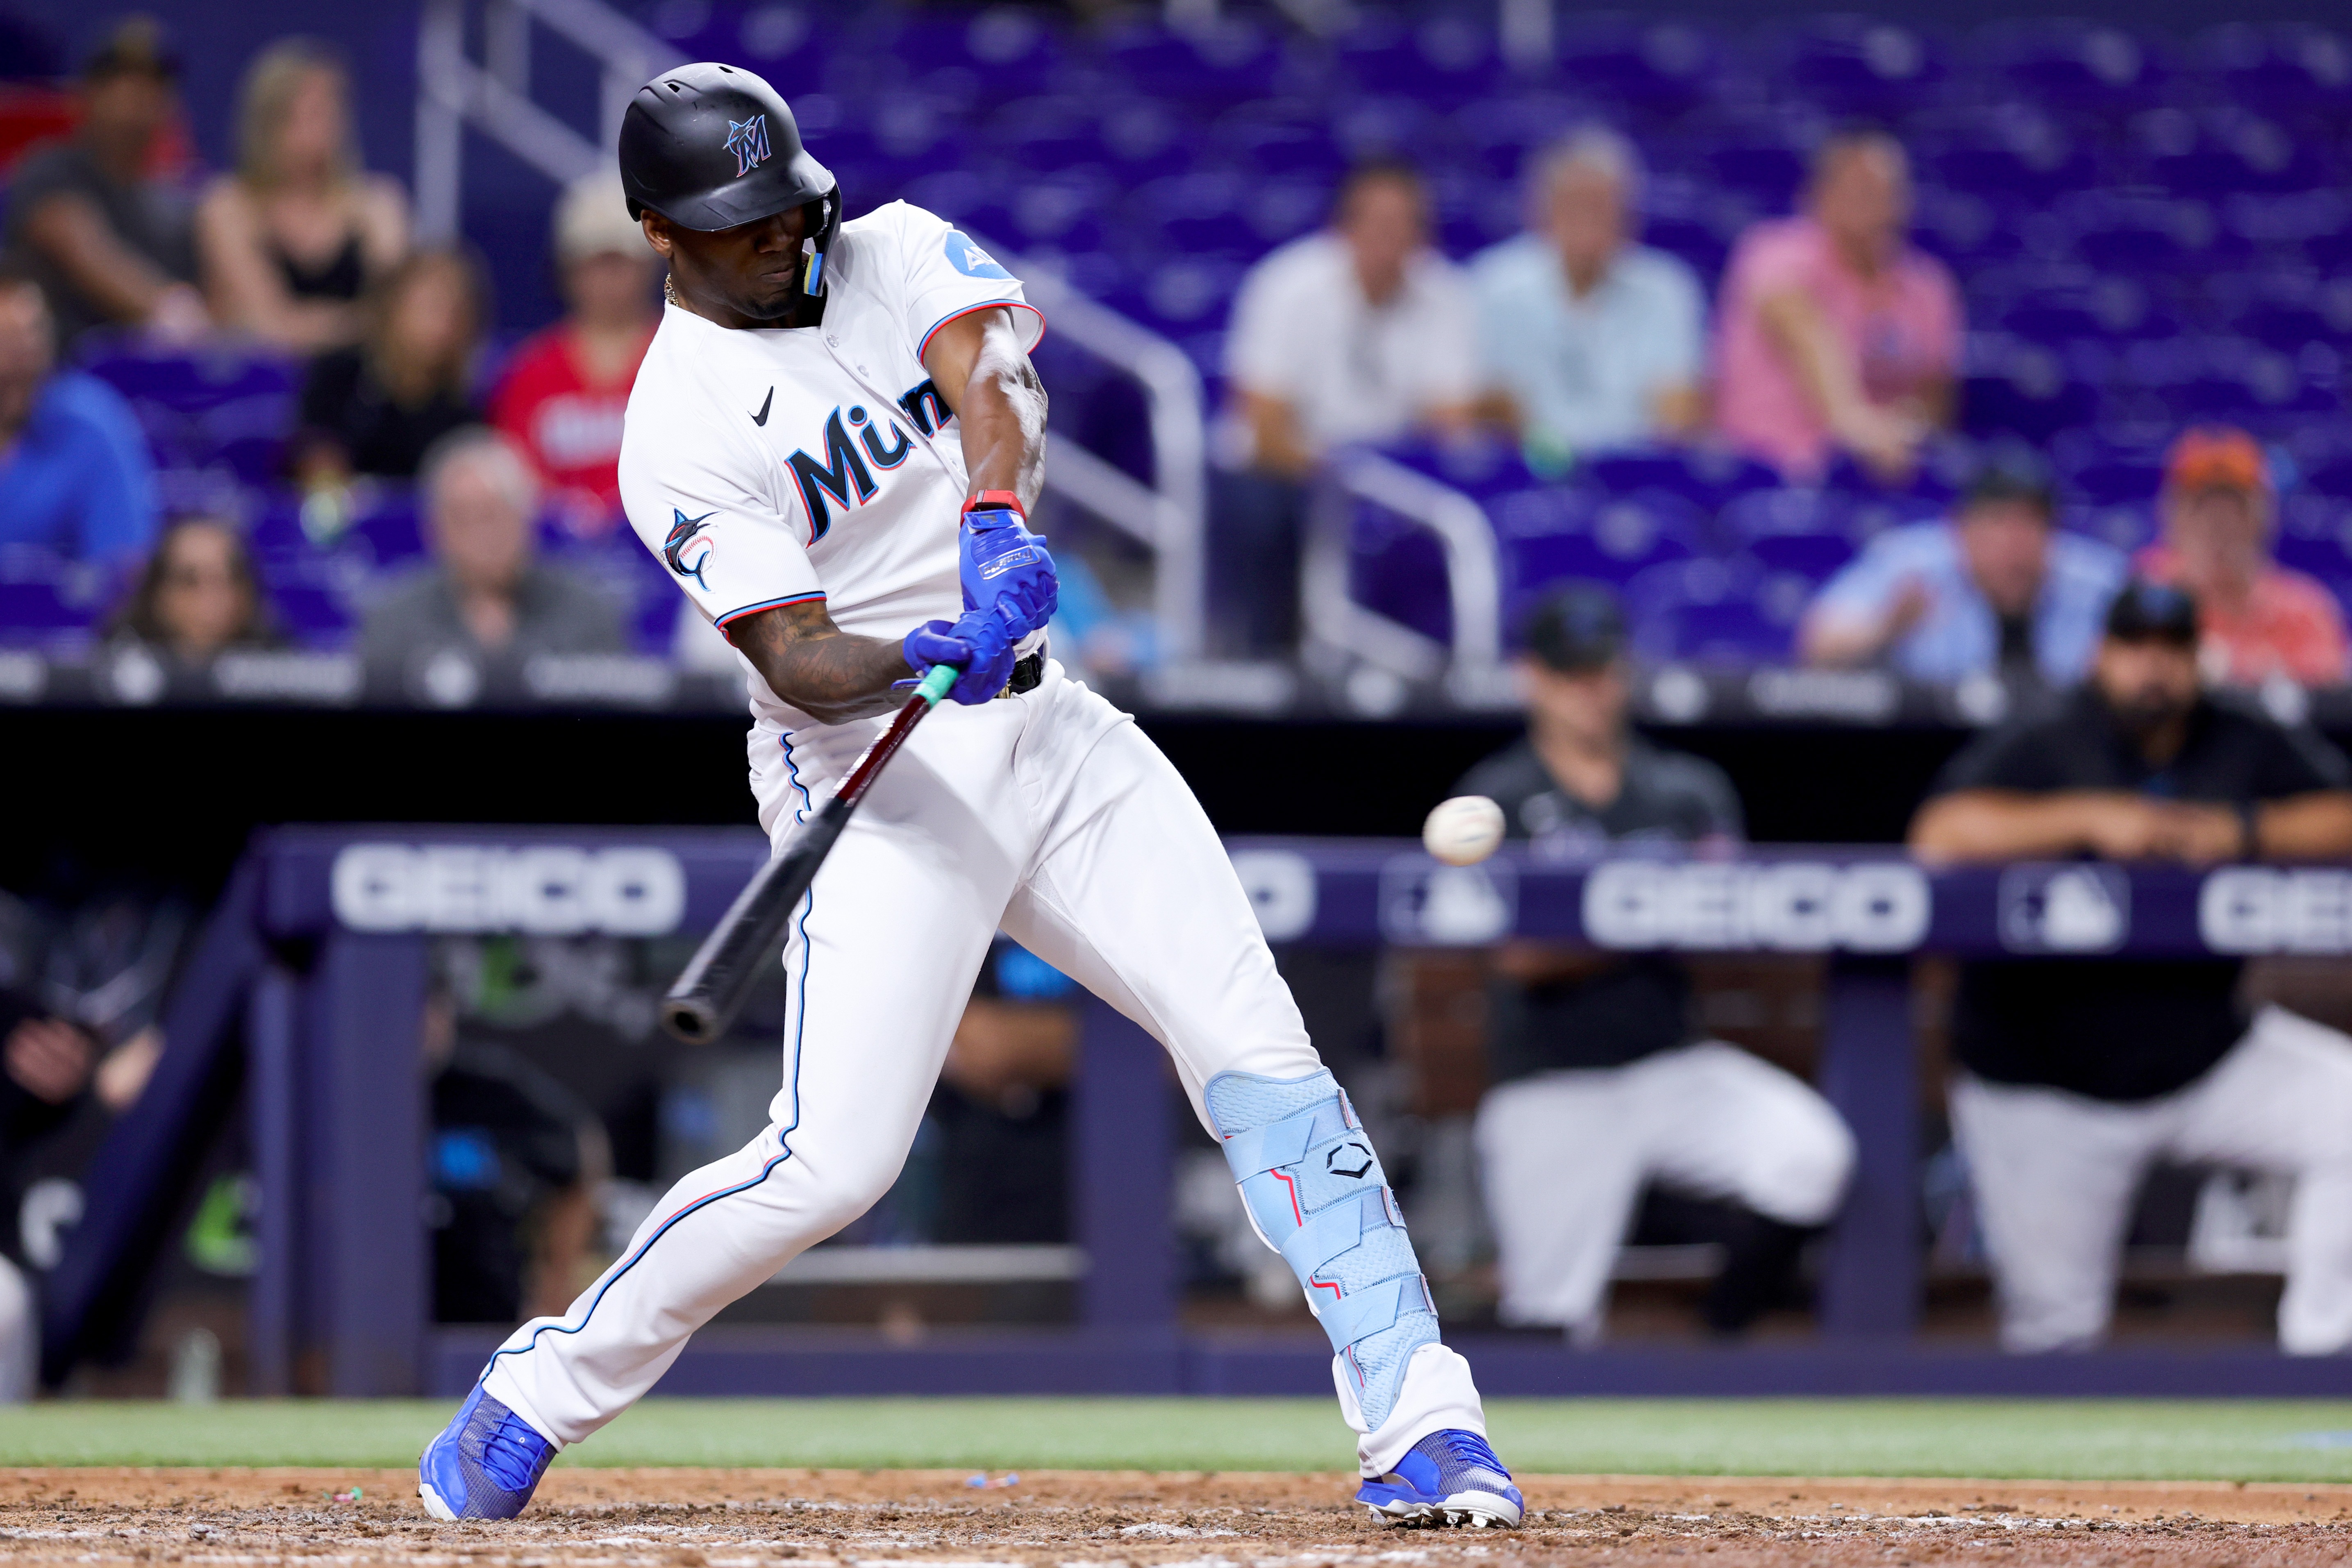 The Marlins placed Jazz Chisholm Jr. on the IL with turf toe, per